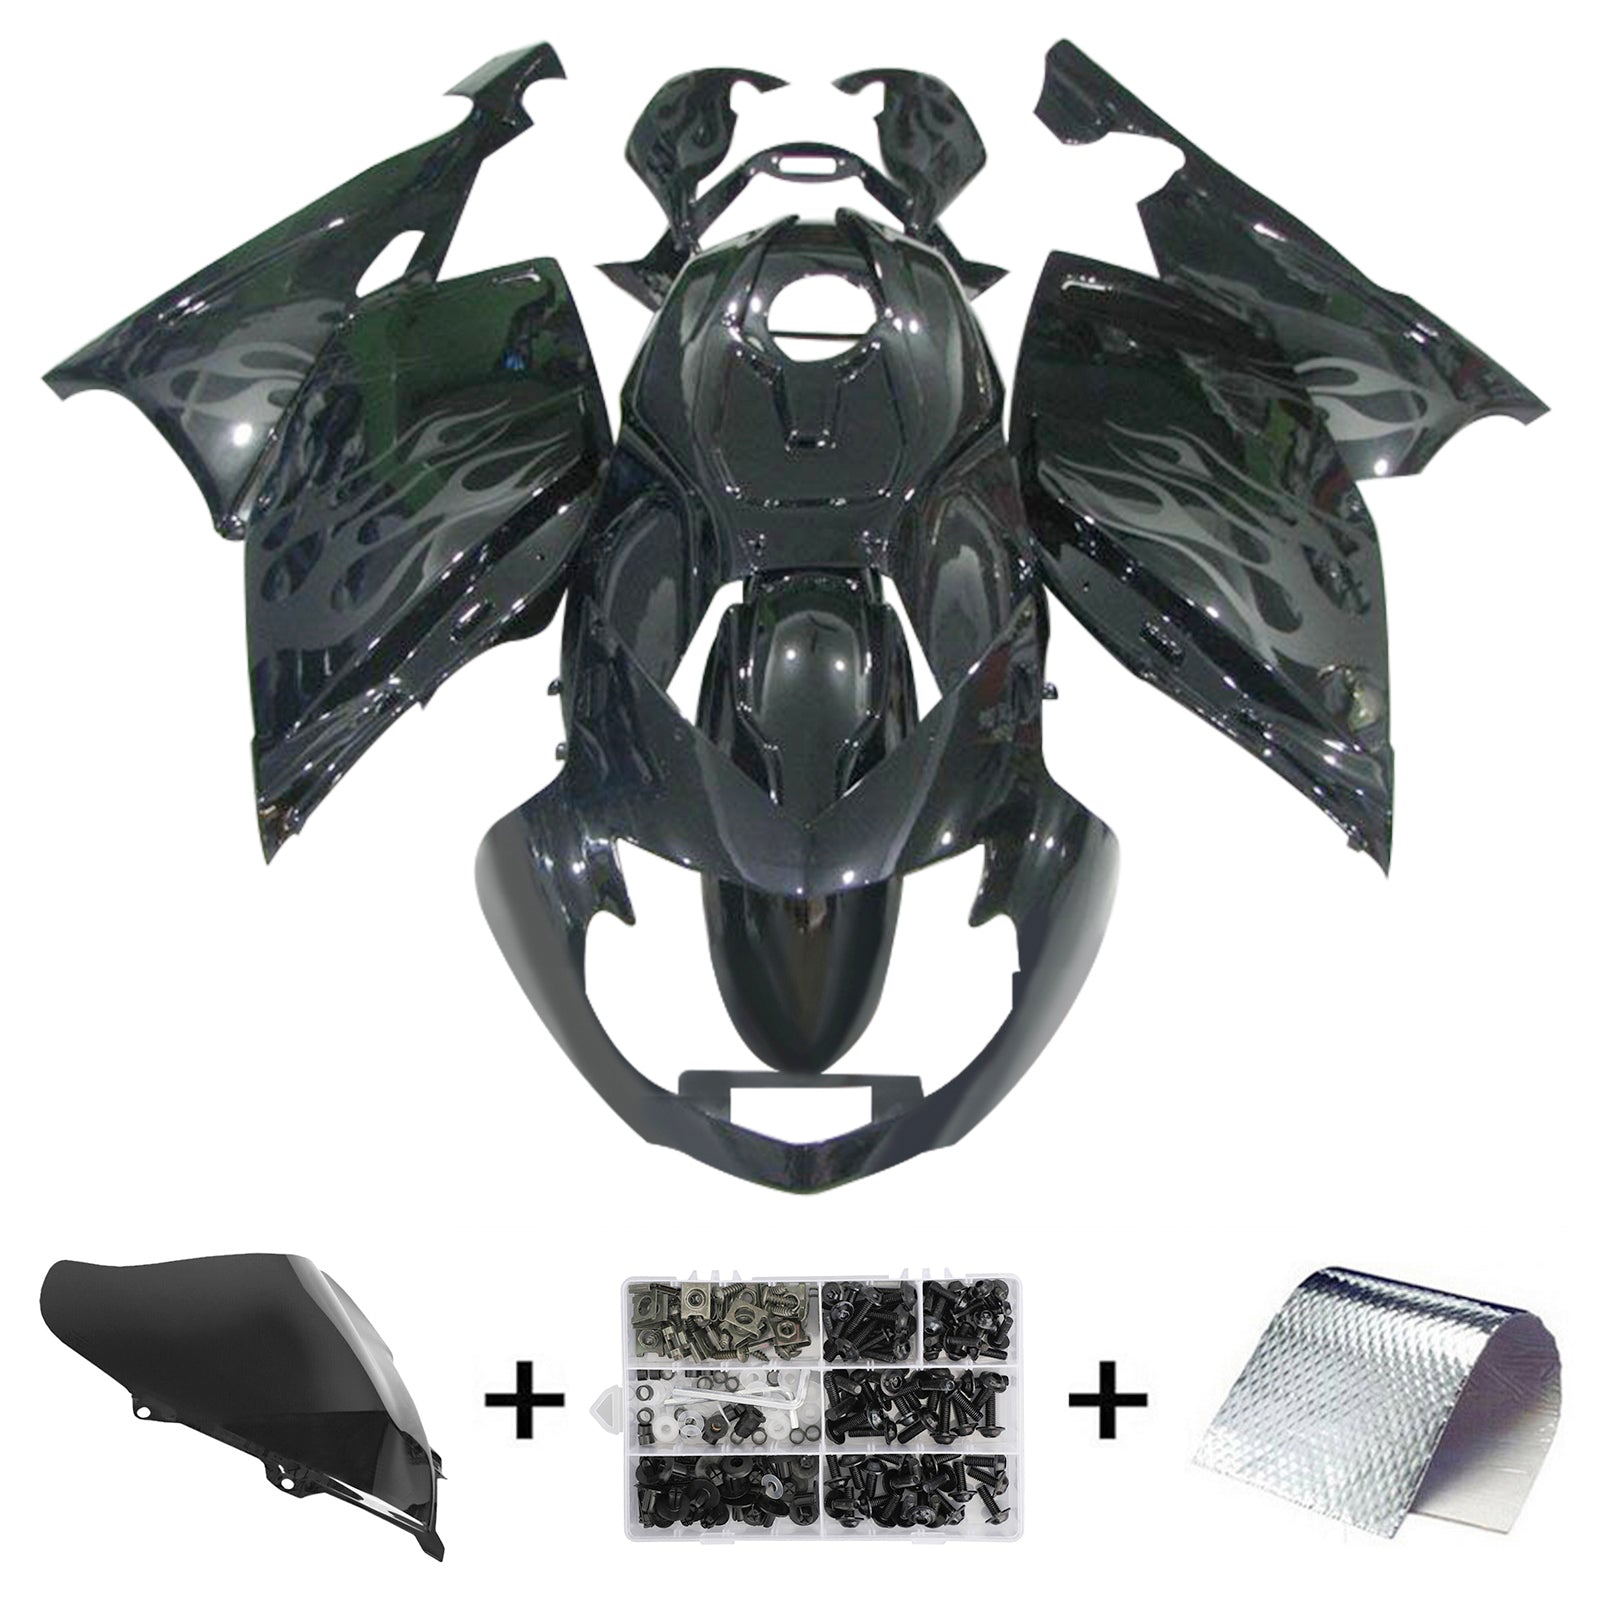 Amotopart 2005-2010 BMW K1200S Black with Flame Fairing Kit